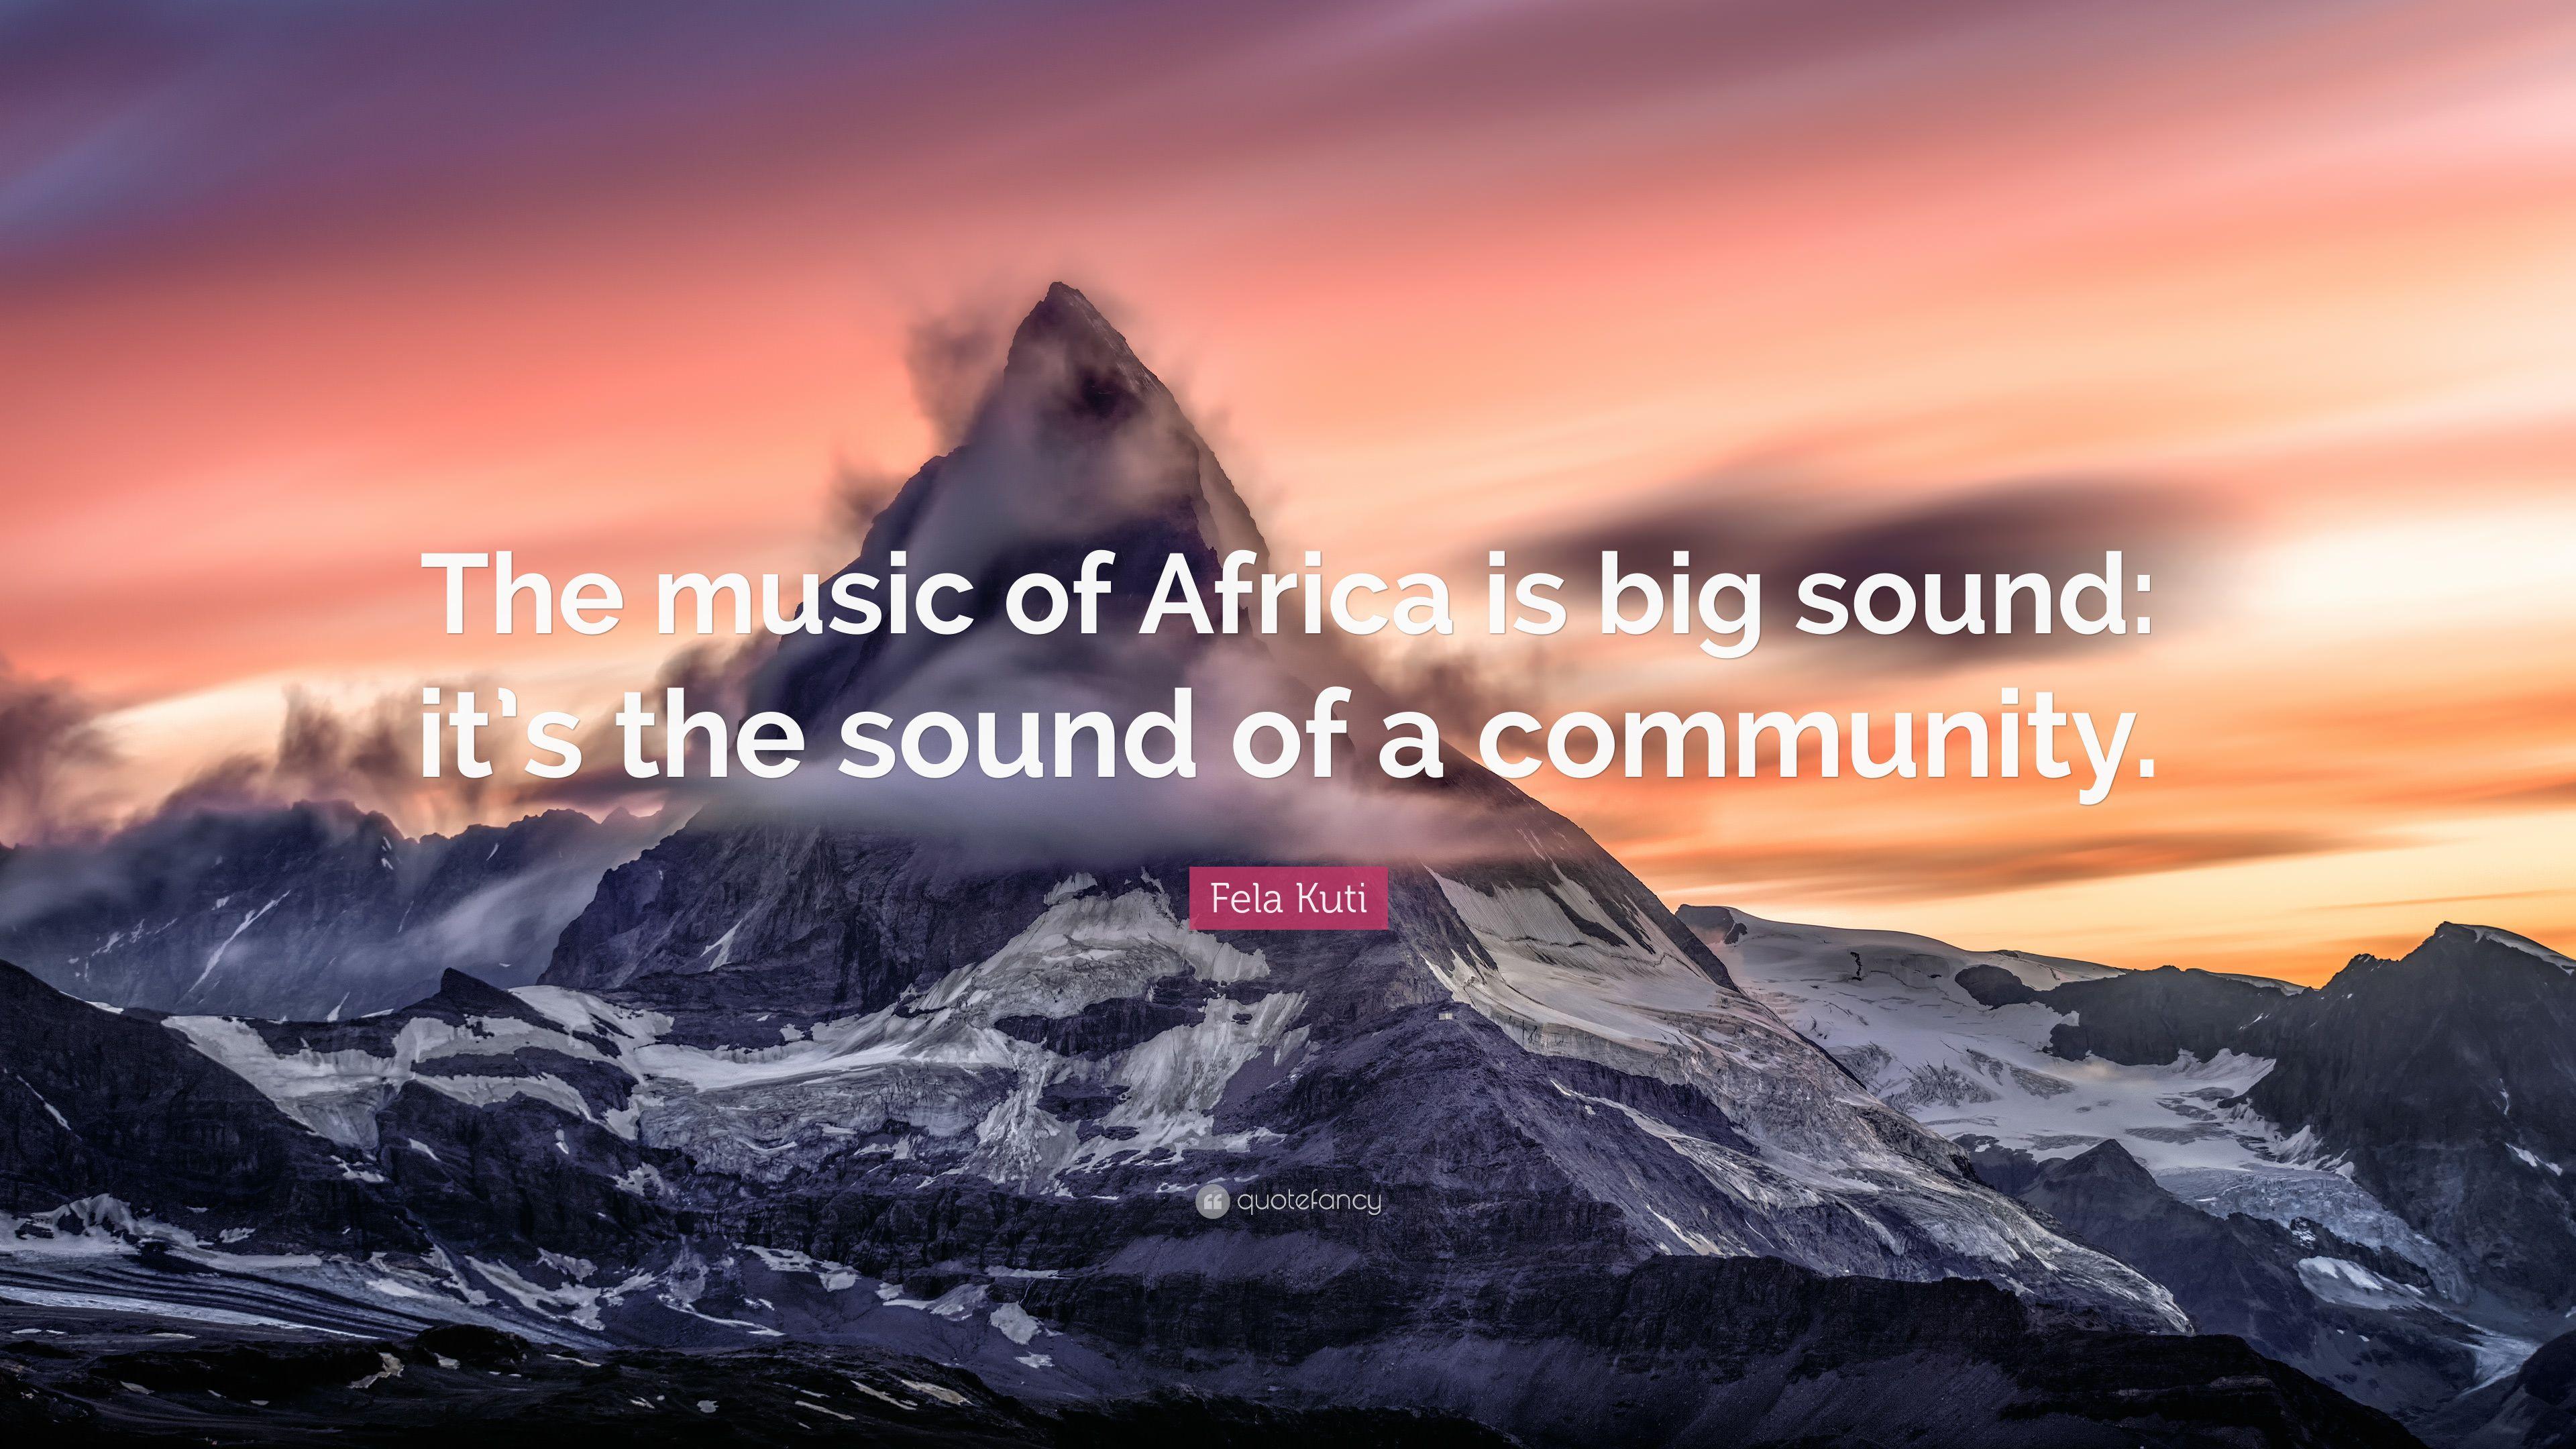 Fela Kuti Quote: “The music of Africa is big sound: it's the sound